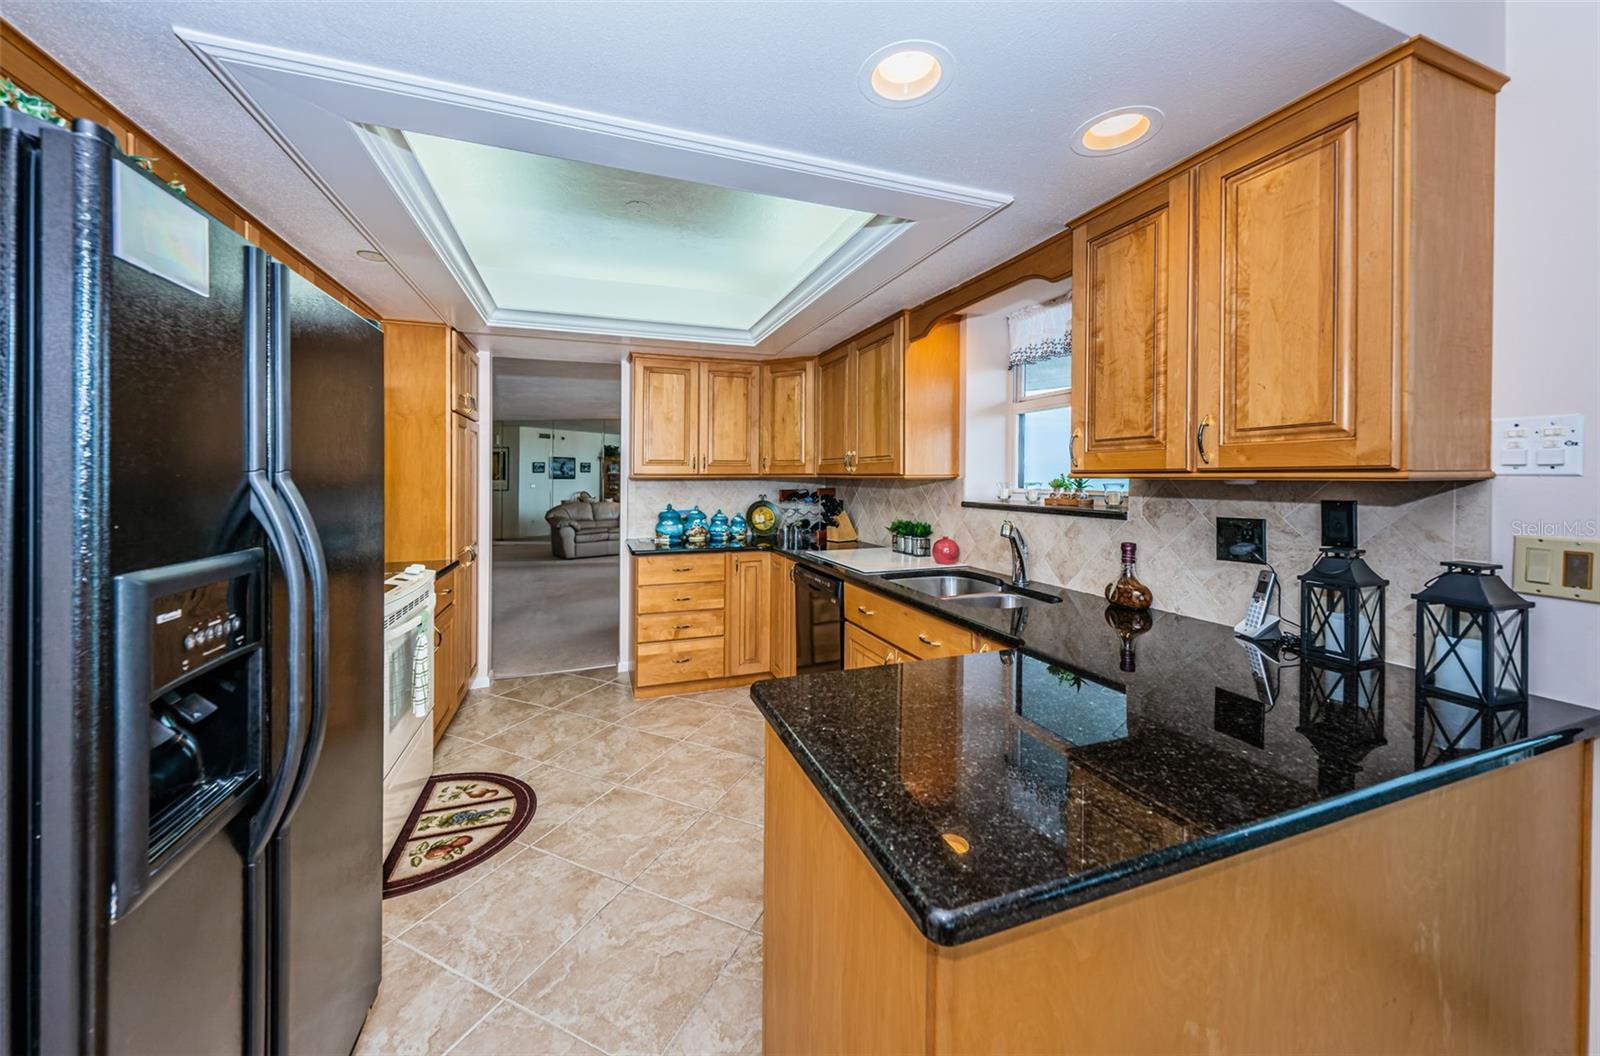 Wonderfully Updated Kitchen adjacent to the Living area & Breakfast room